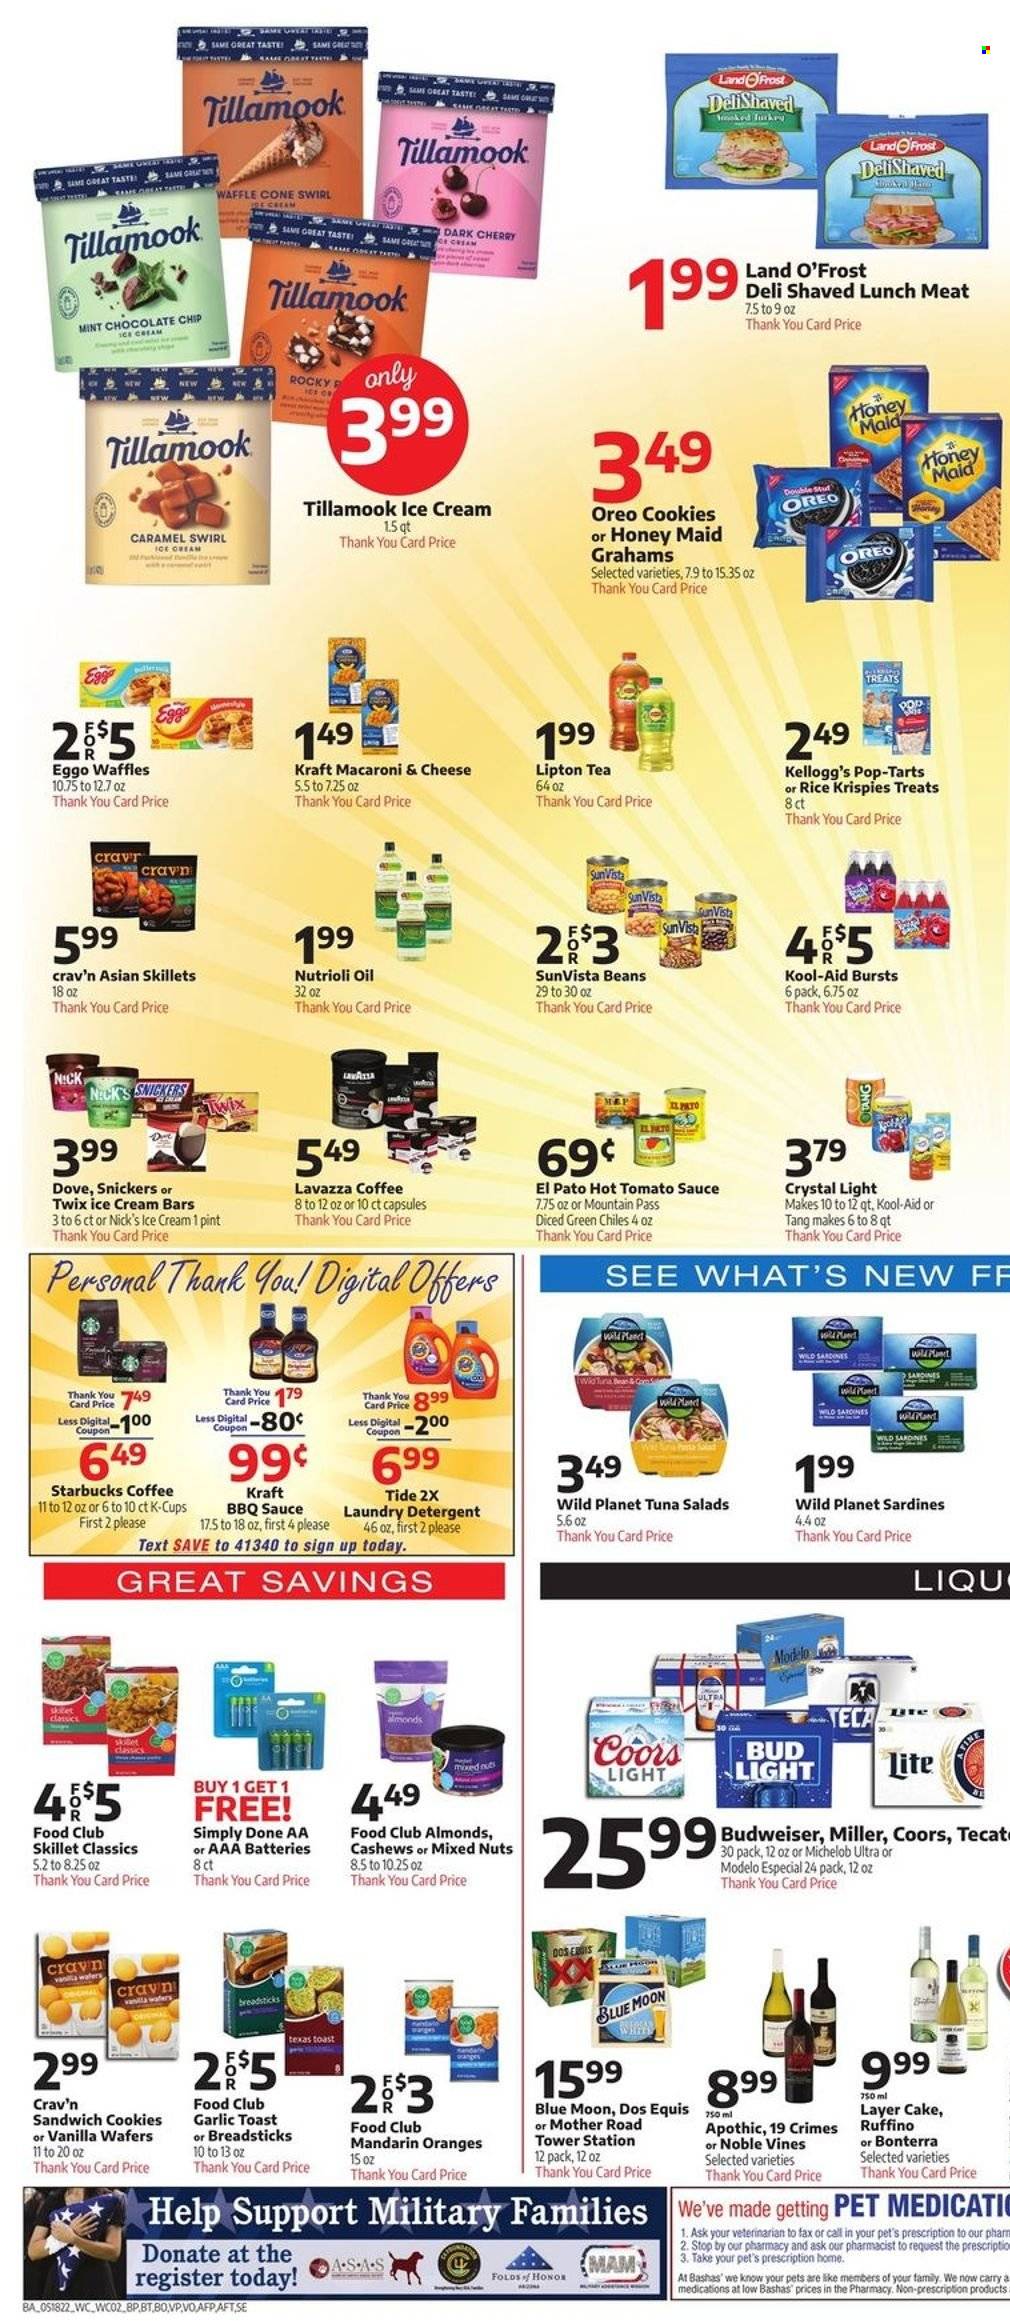 thumbnail - Bashas' Flyer - 05/18/2022 - 05/24/2022 - Sales products - waffles, mandarines, cherries, oranges, sardines, tuna, macaroni & cheese, sandwich, sauce, Kraft®, lunch meat, Oreo, ice cream, ice cream bars, Nick's Ice Cream, cookies, sandwich cookies, wafers, Snickers, Twix, Kellogg's, Pop-Tarts, bread sticks, tomato sauce, Rice Krispies, Honey Maid, BBQ sauce, caramel, oil, almonds, cashews, mixed nuts, Lipton, tea, coffee, Starbucks, coffee capsules, K-Cups, Lavazza, beer, Bud Light, Miller, Modelo, Dove, detergent, Tide, laundry detergent, Budweiser, Coors, Dos Equis, Blue Moon, Michelob. Page 2.